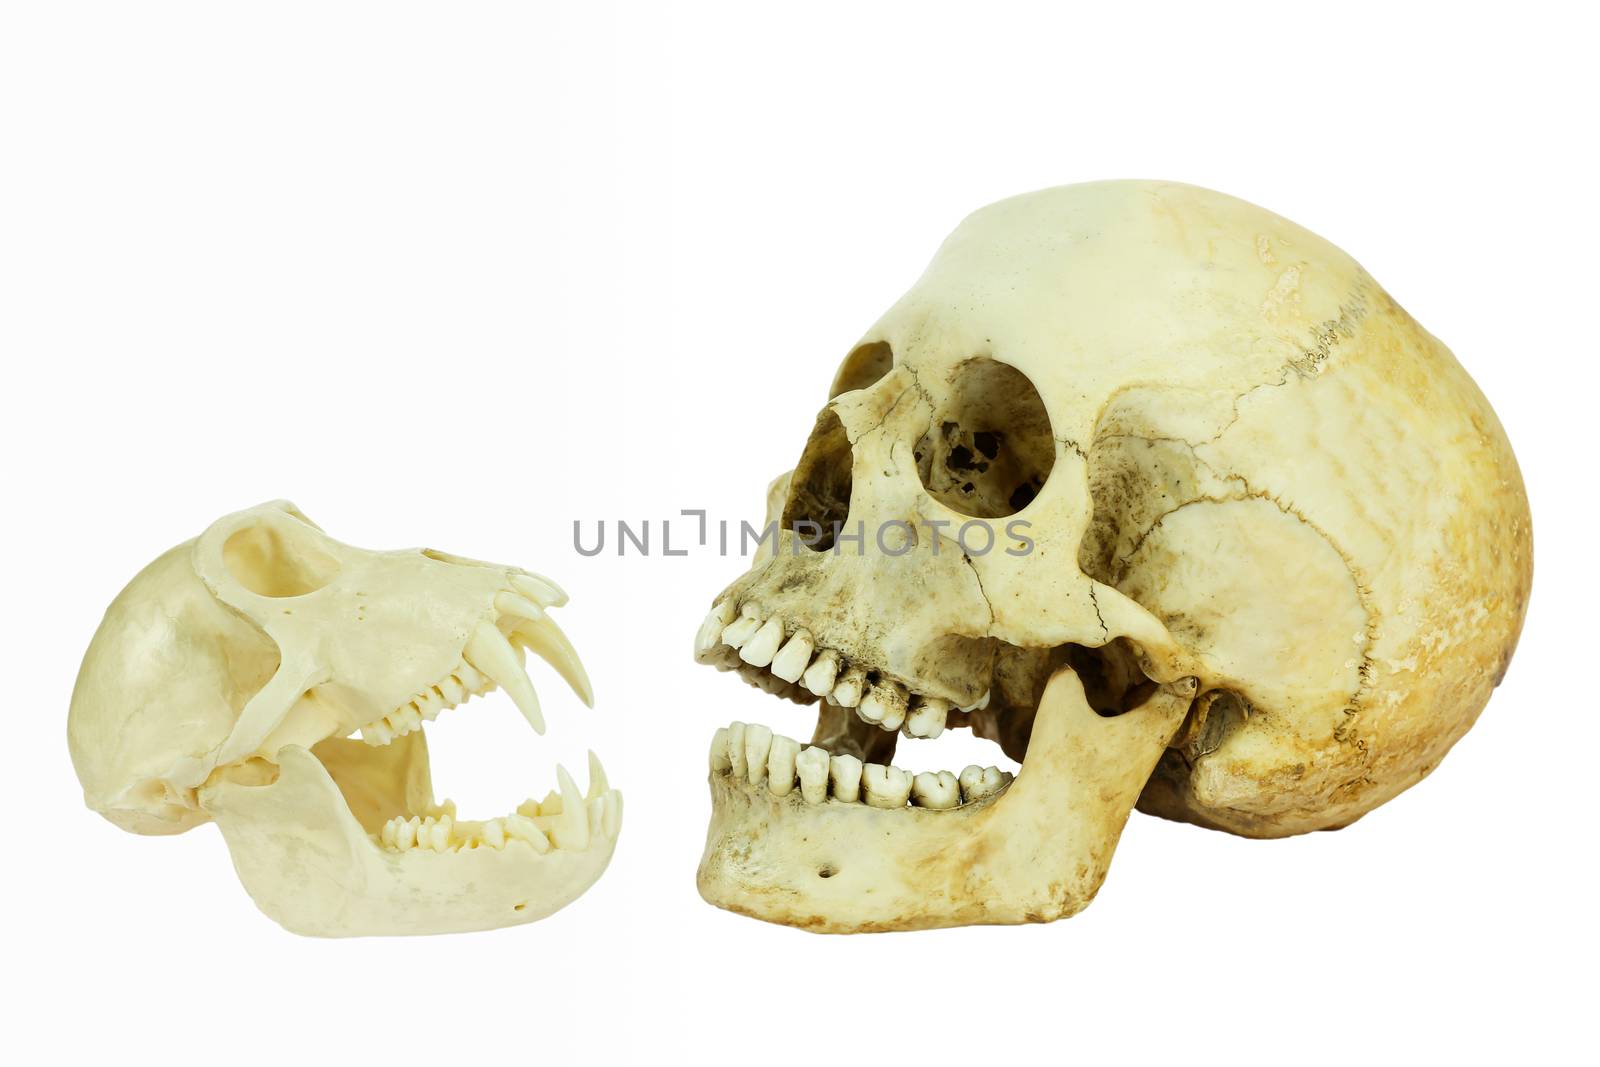 Human and monkey skull opposite of each other with open mouths isolated on white background